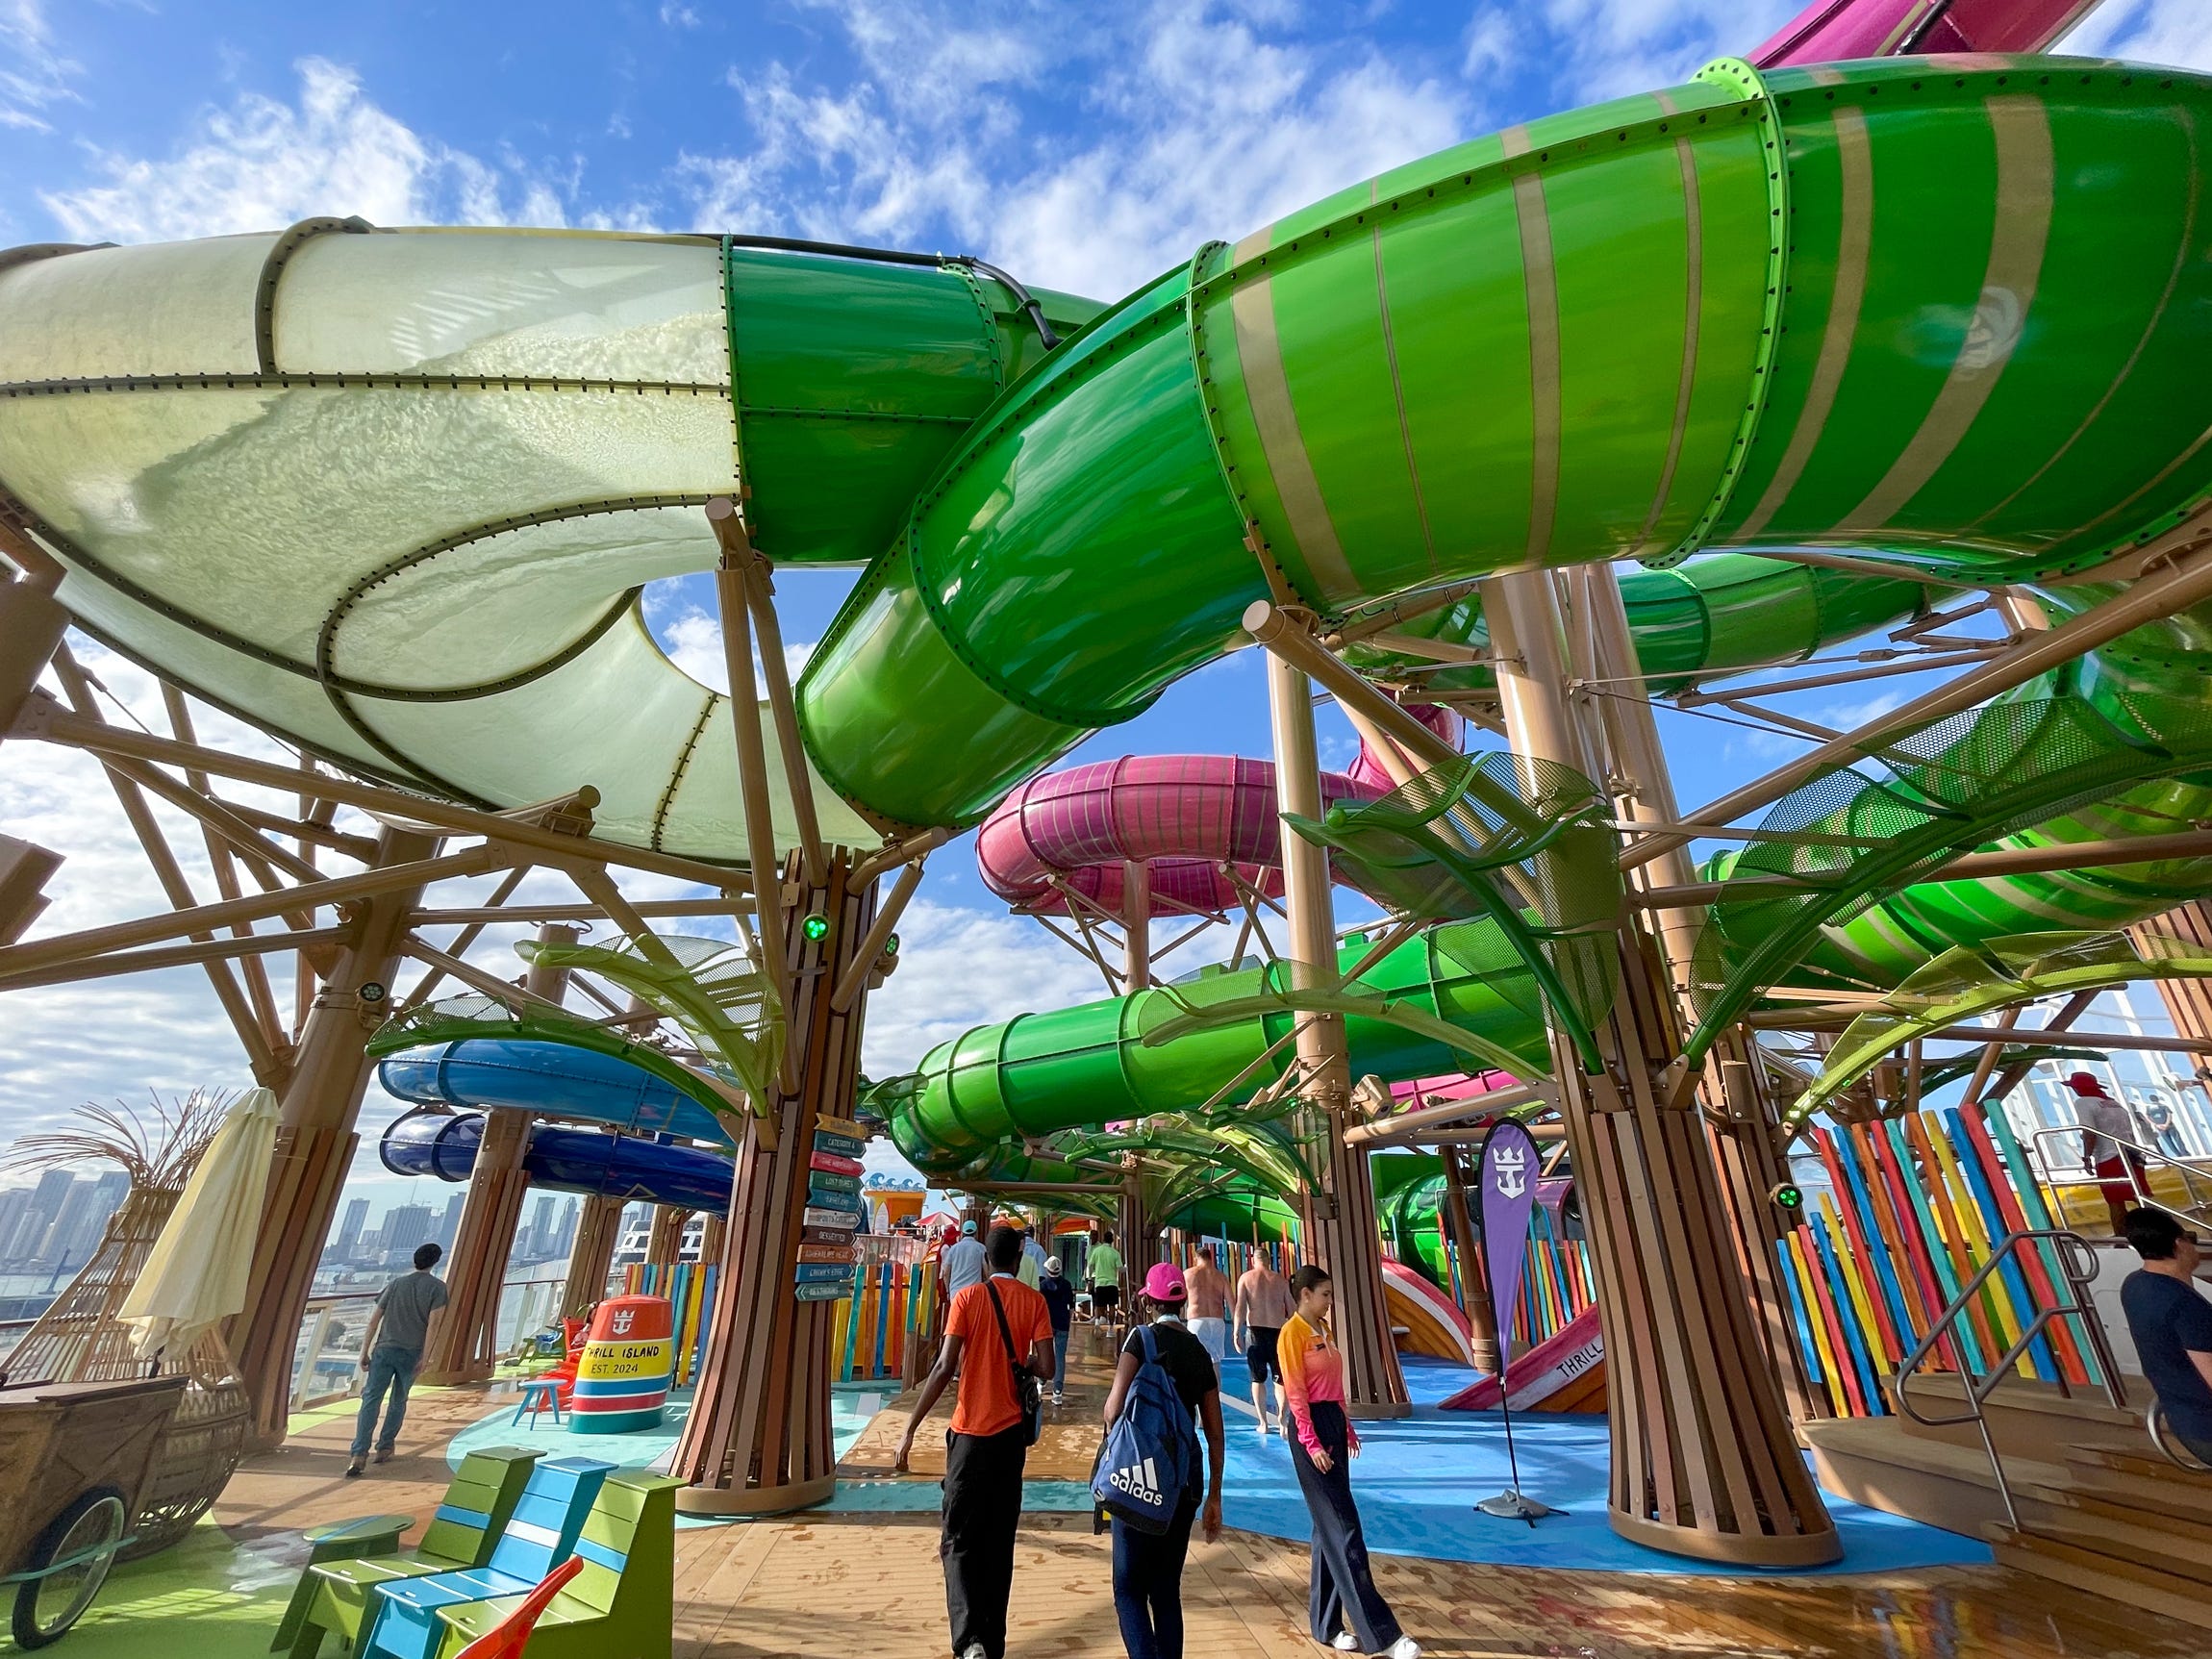 <p>The twisting slides hang overhead like bright tree vines while children rapidly zig-zag around the course like their afternoon fun depends on it (it does).</p>